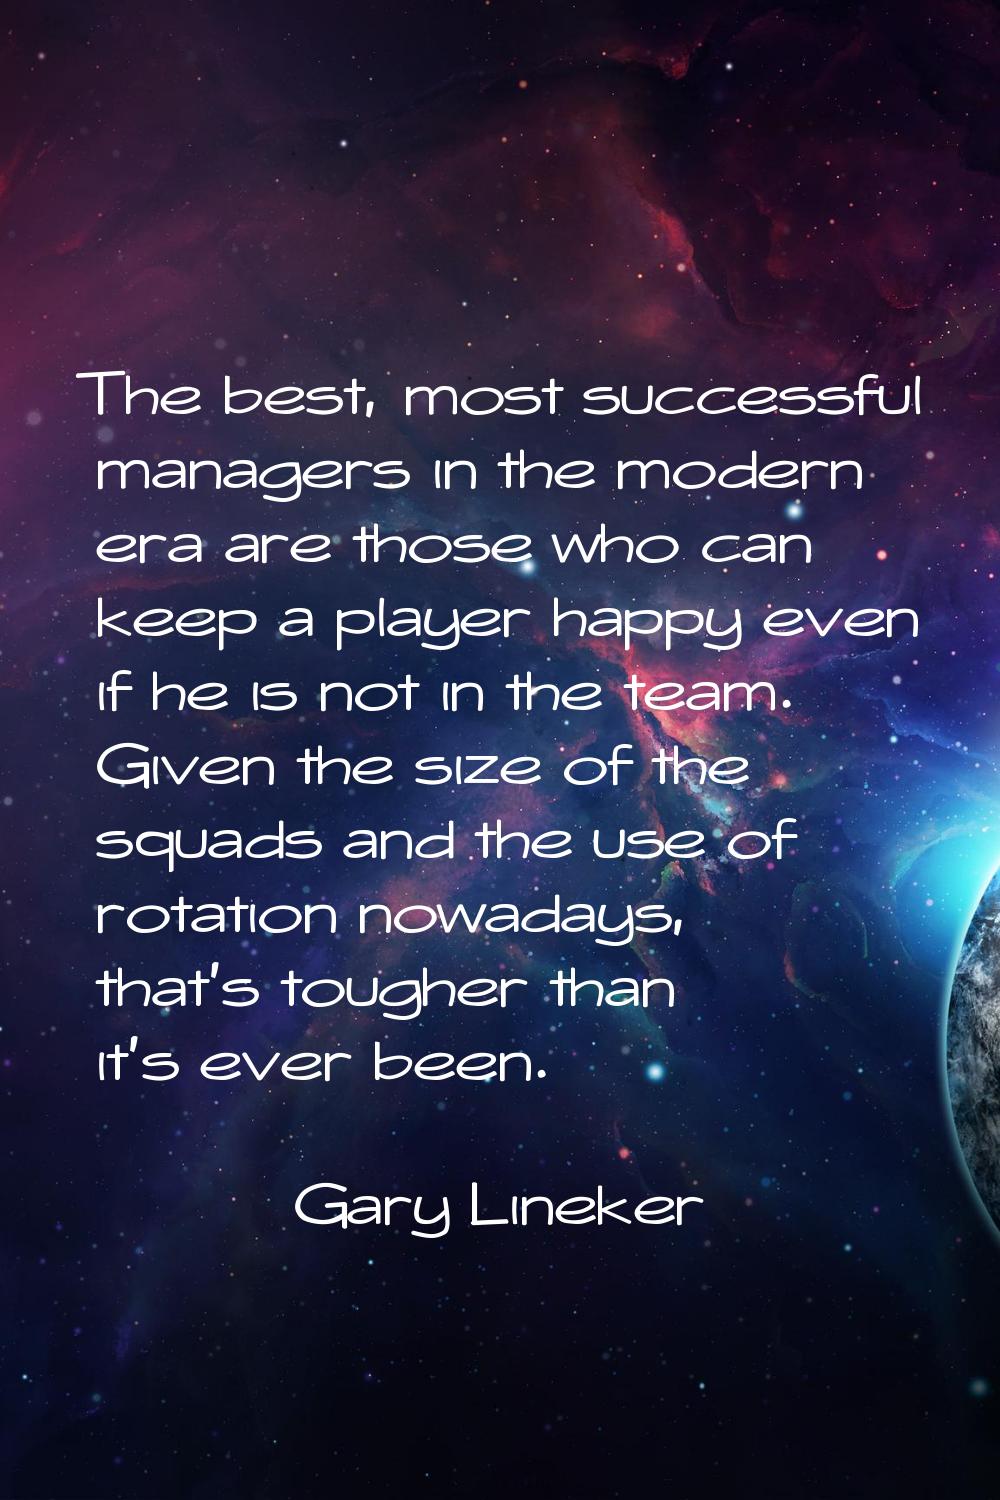 The best, most successful managers in the modern era are those who can keep a player happy even if 